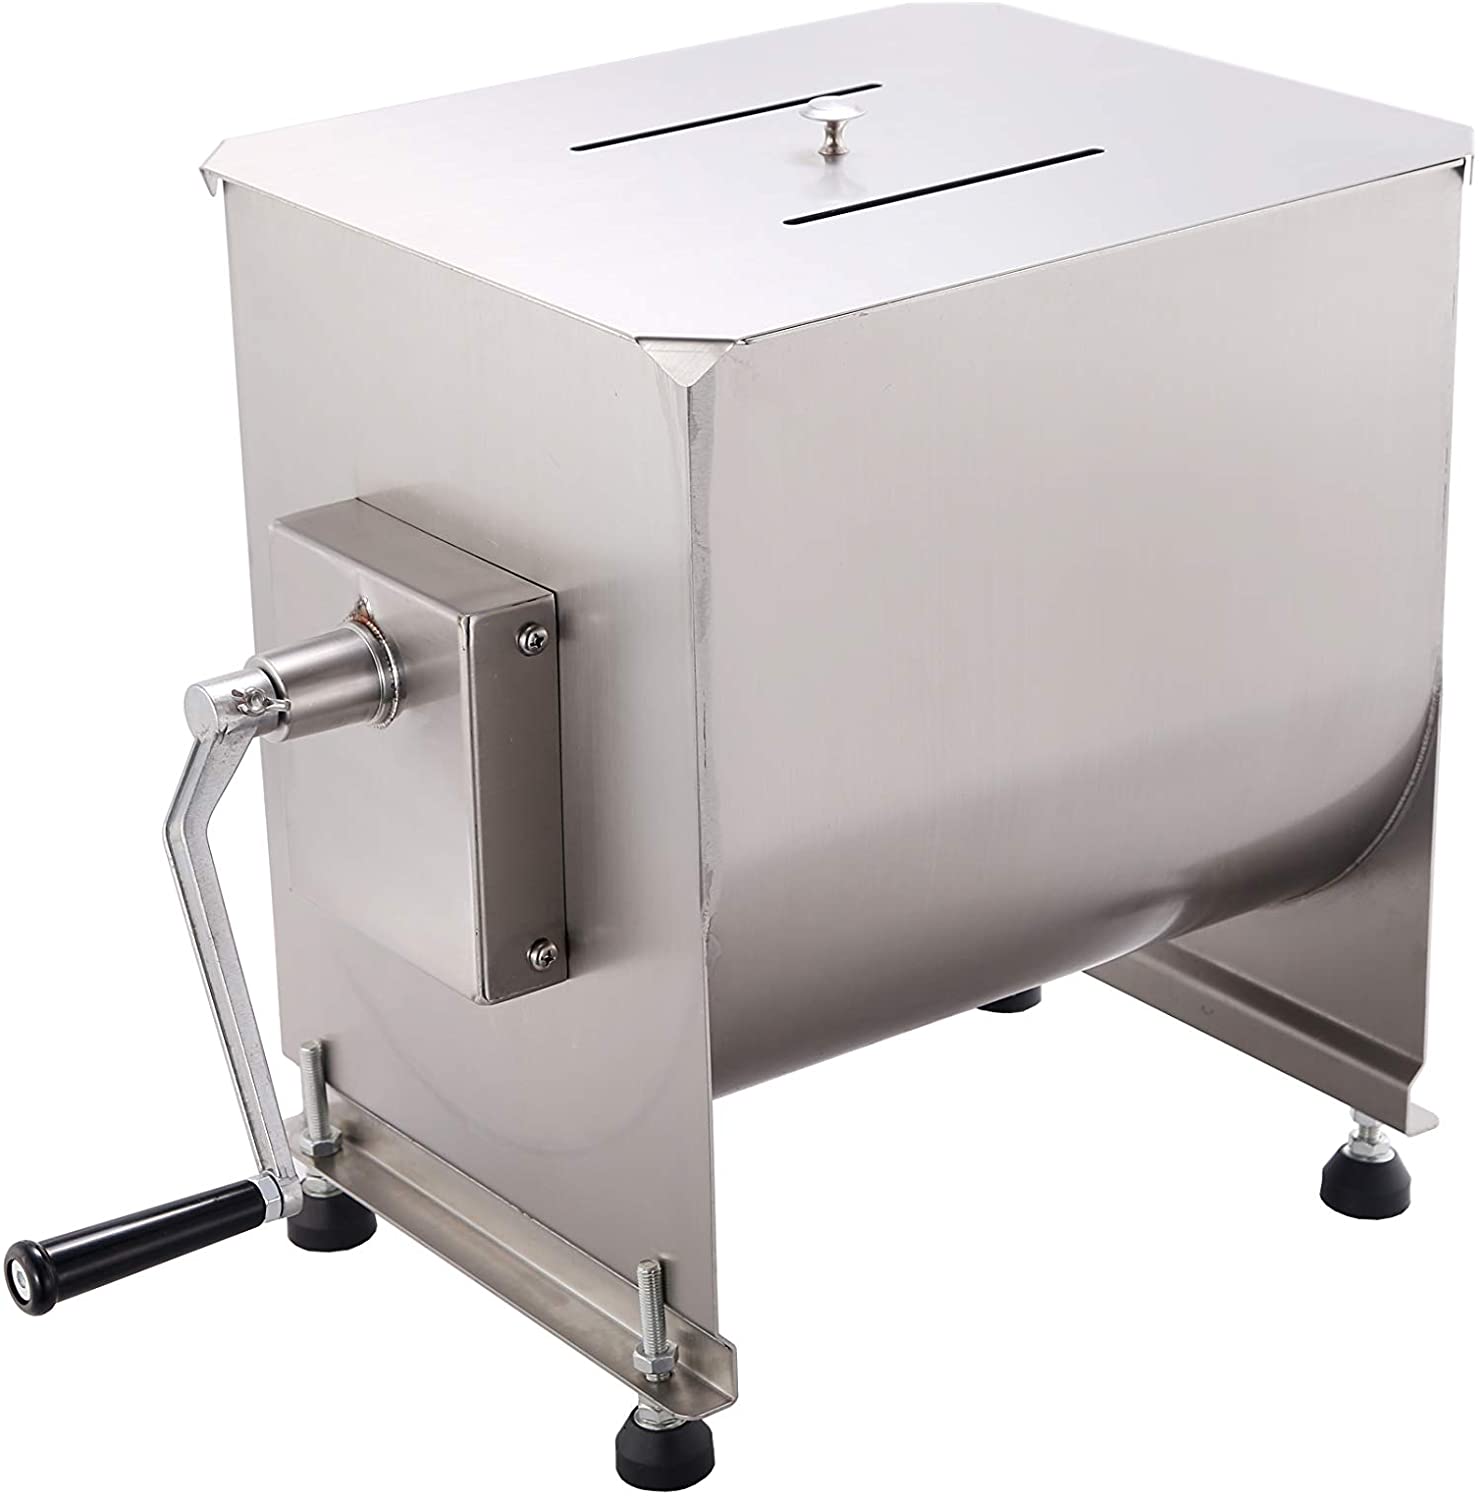  Hakka® Electric 120-Pound/60-Liter Capacity Tank Stainless  Steel Meat Mixers (Mixing Maximum 90-Pound for Meat). : Home & Kitchen